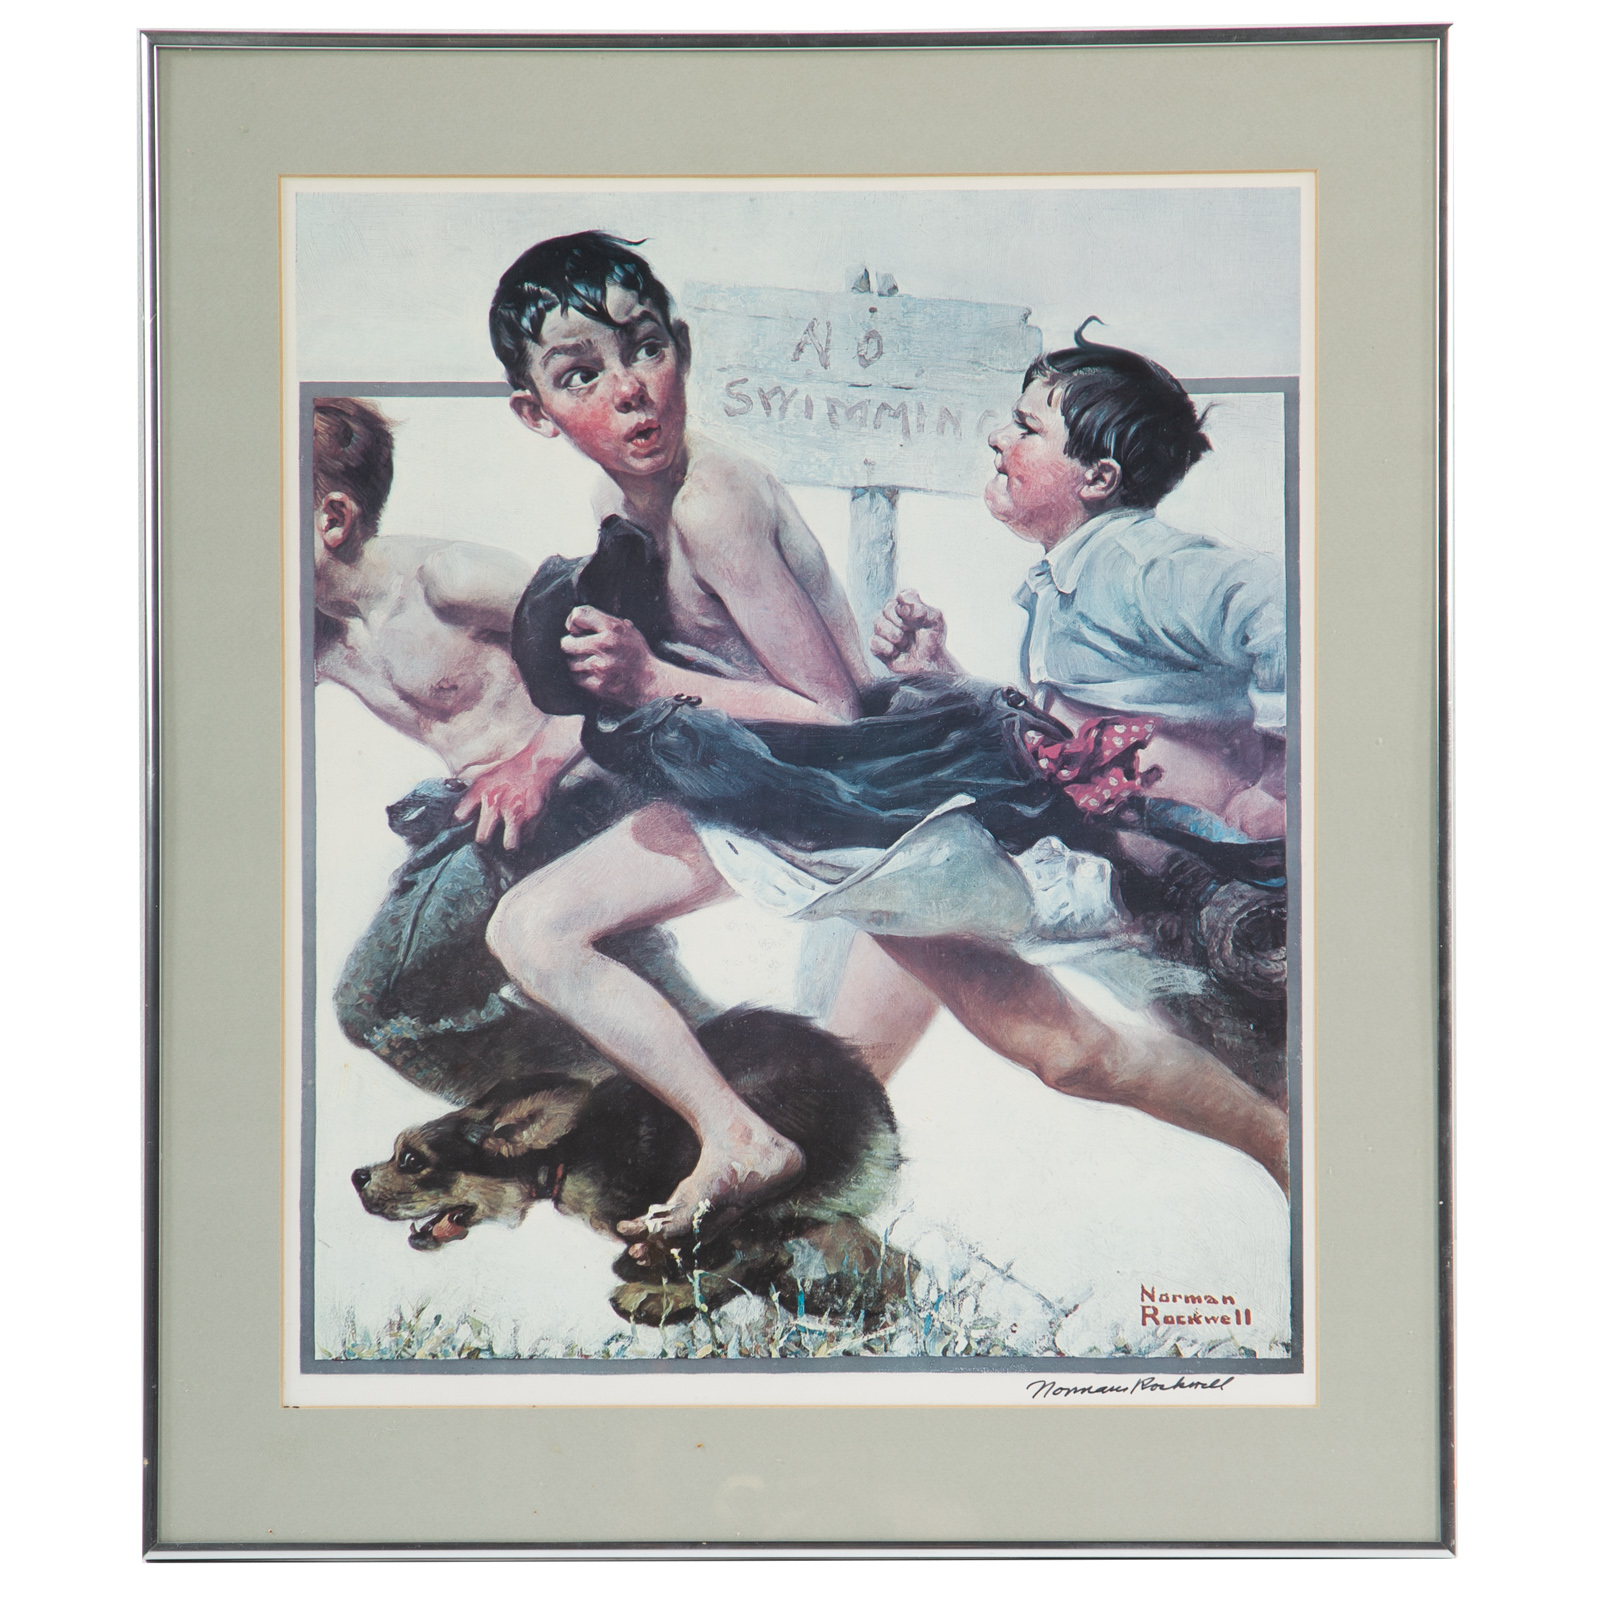 NORMAN ROCKWELL. NO SWIMMING, OFFSET